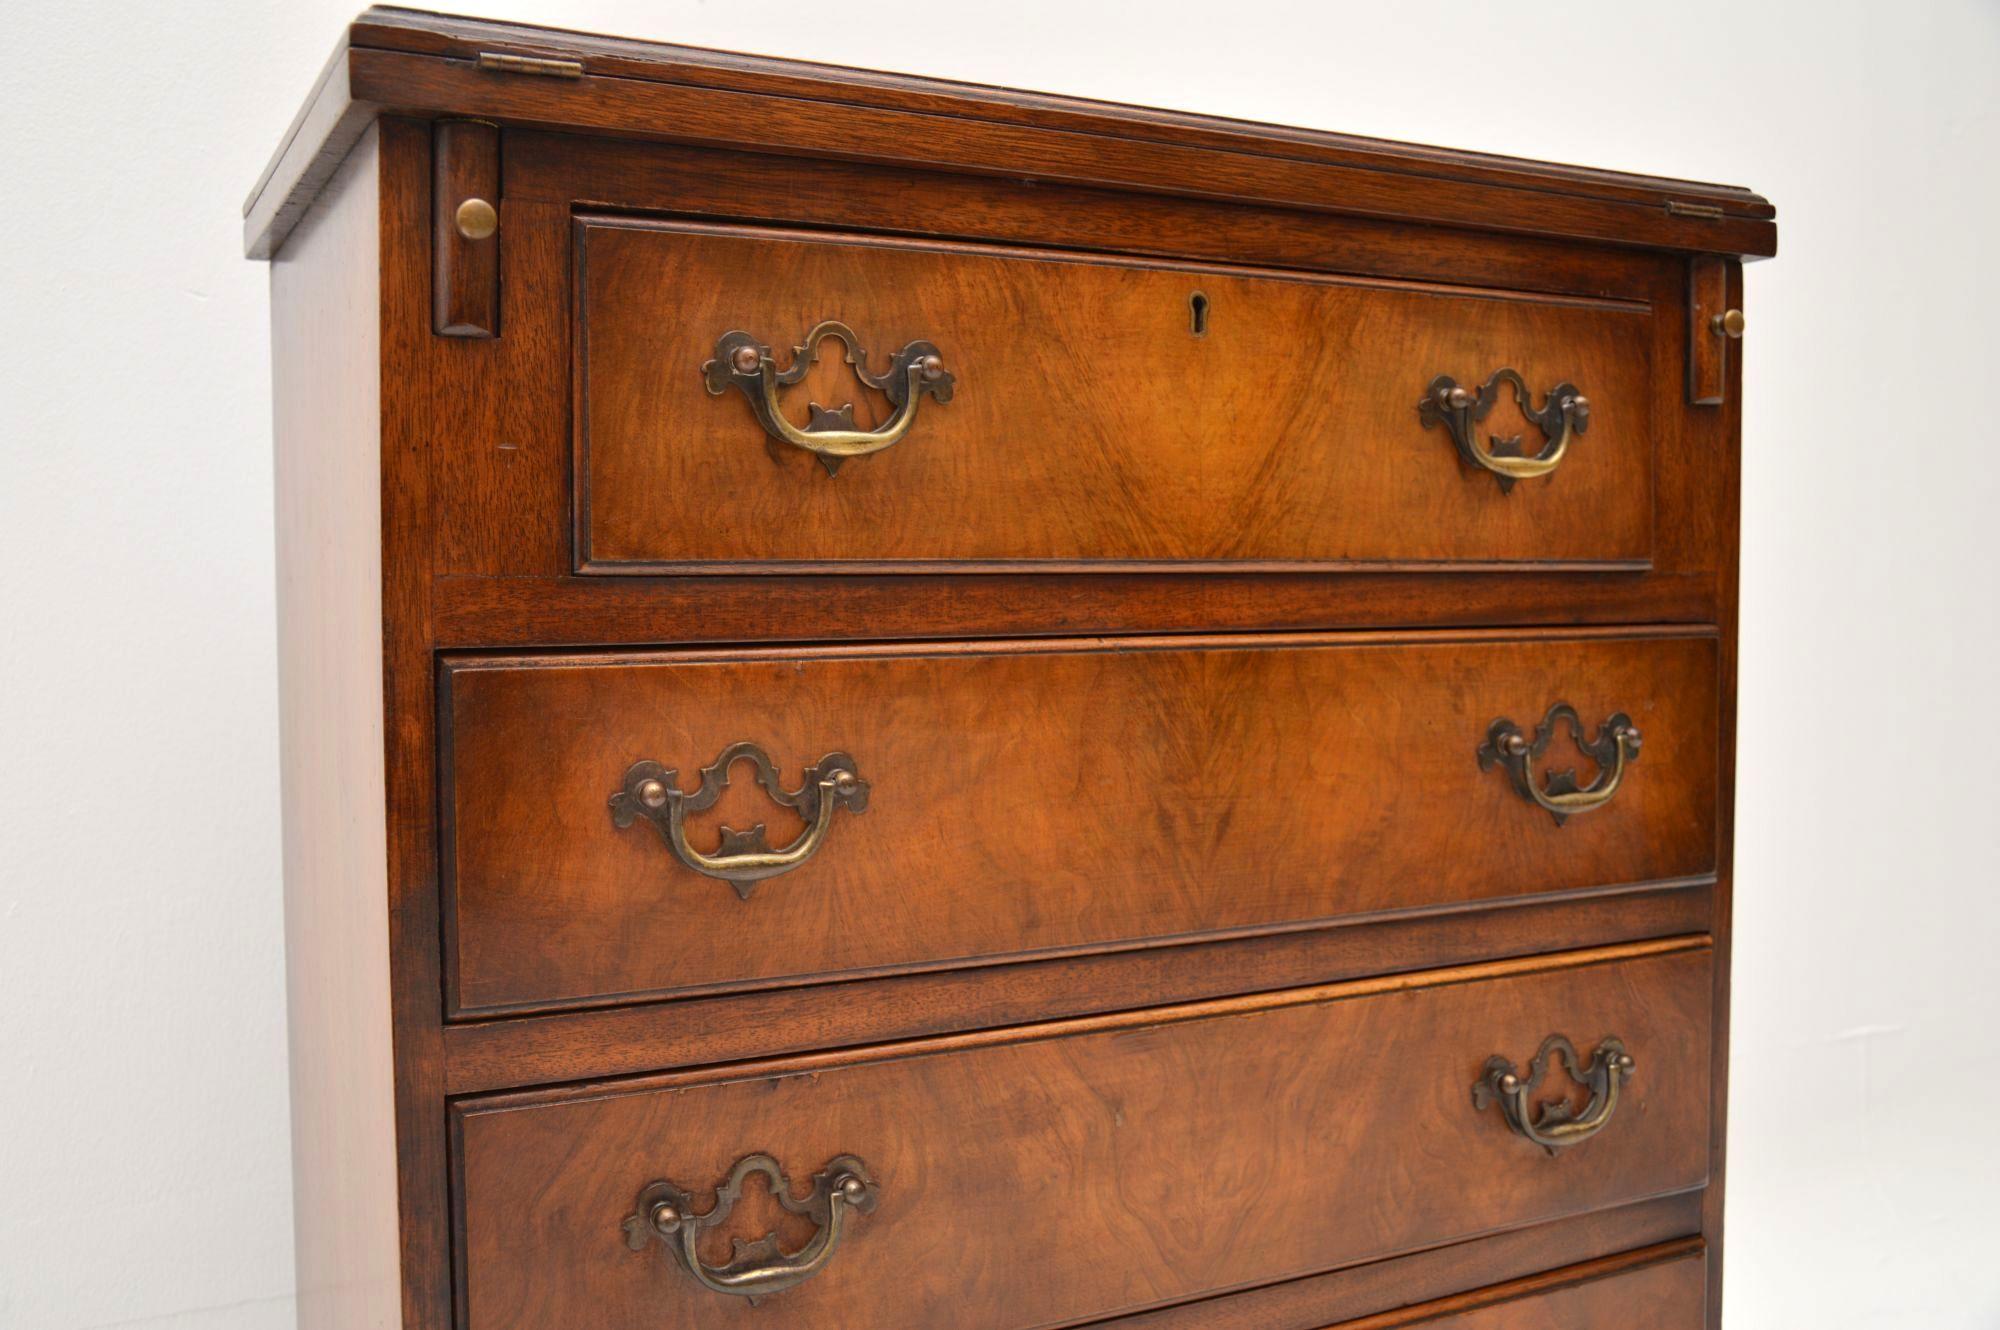 English Antique Walnut Bachelors Chest of Drawers